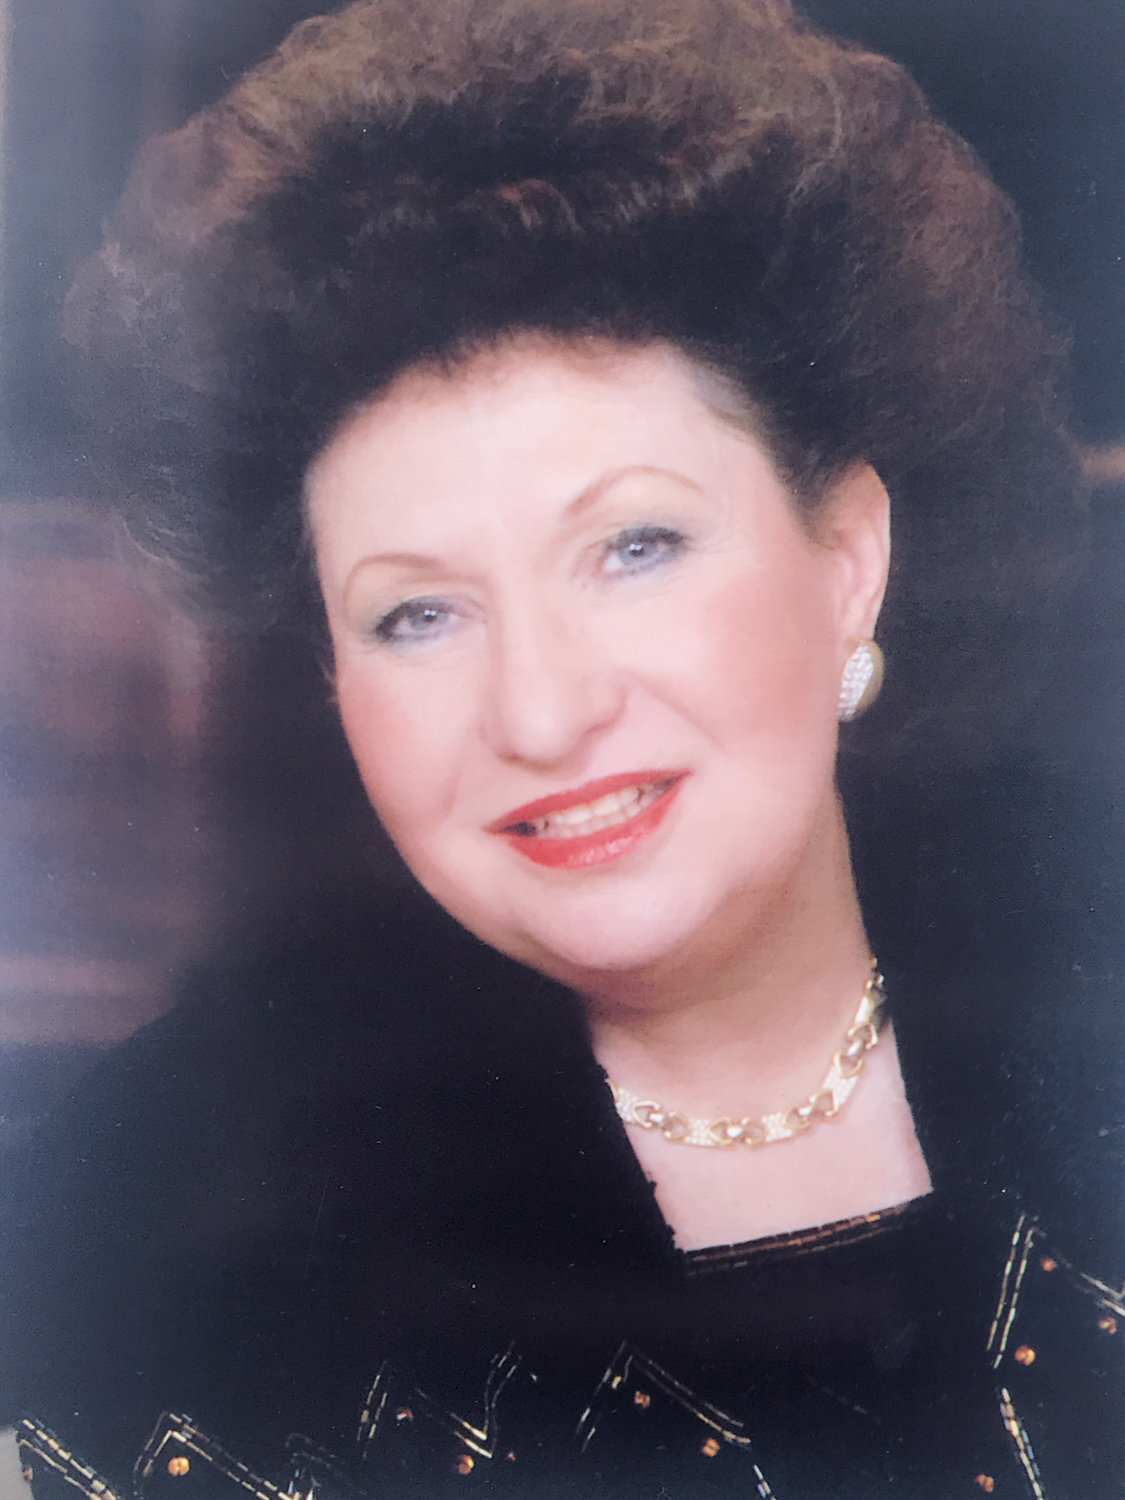 Marilyn Sopher, along with husband Morris, built a real estate empire in the Bronx headquartered in Riverdale. She died Feb. 22 at 84.